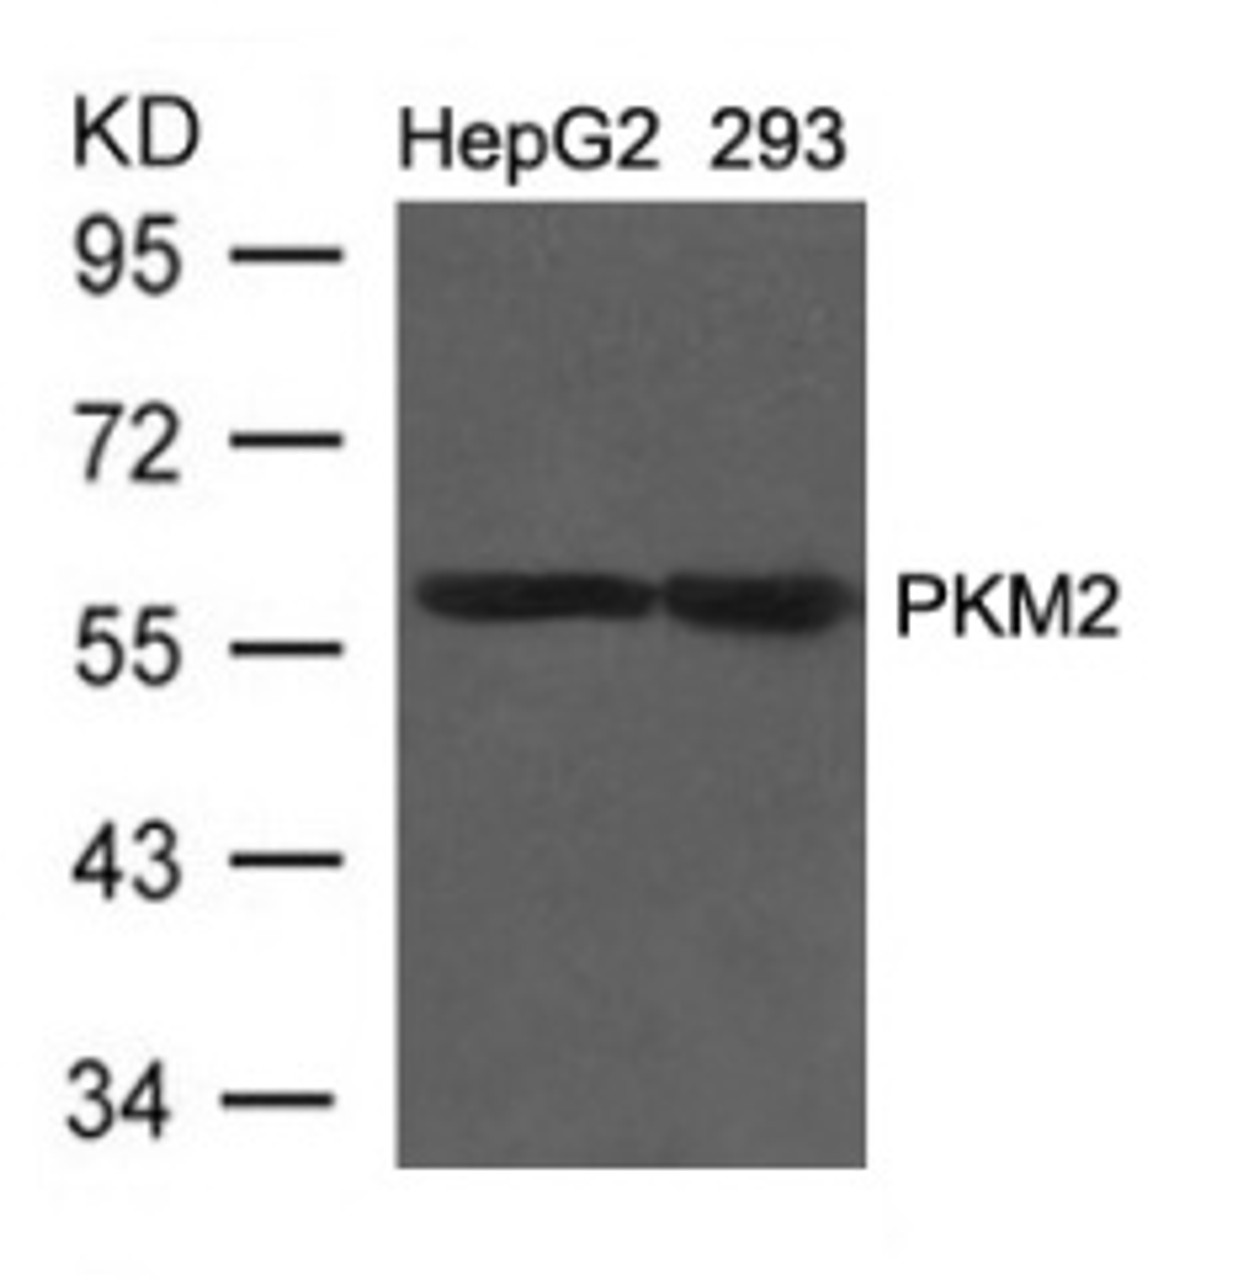 Western blot analysis of lysed extracts from HepG2 and 293 cells using PKM1/2 Antibody.